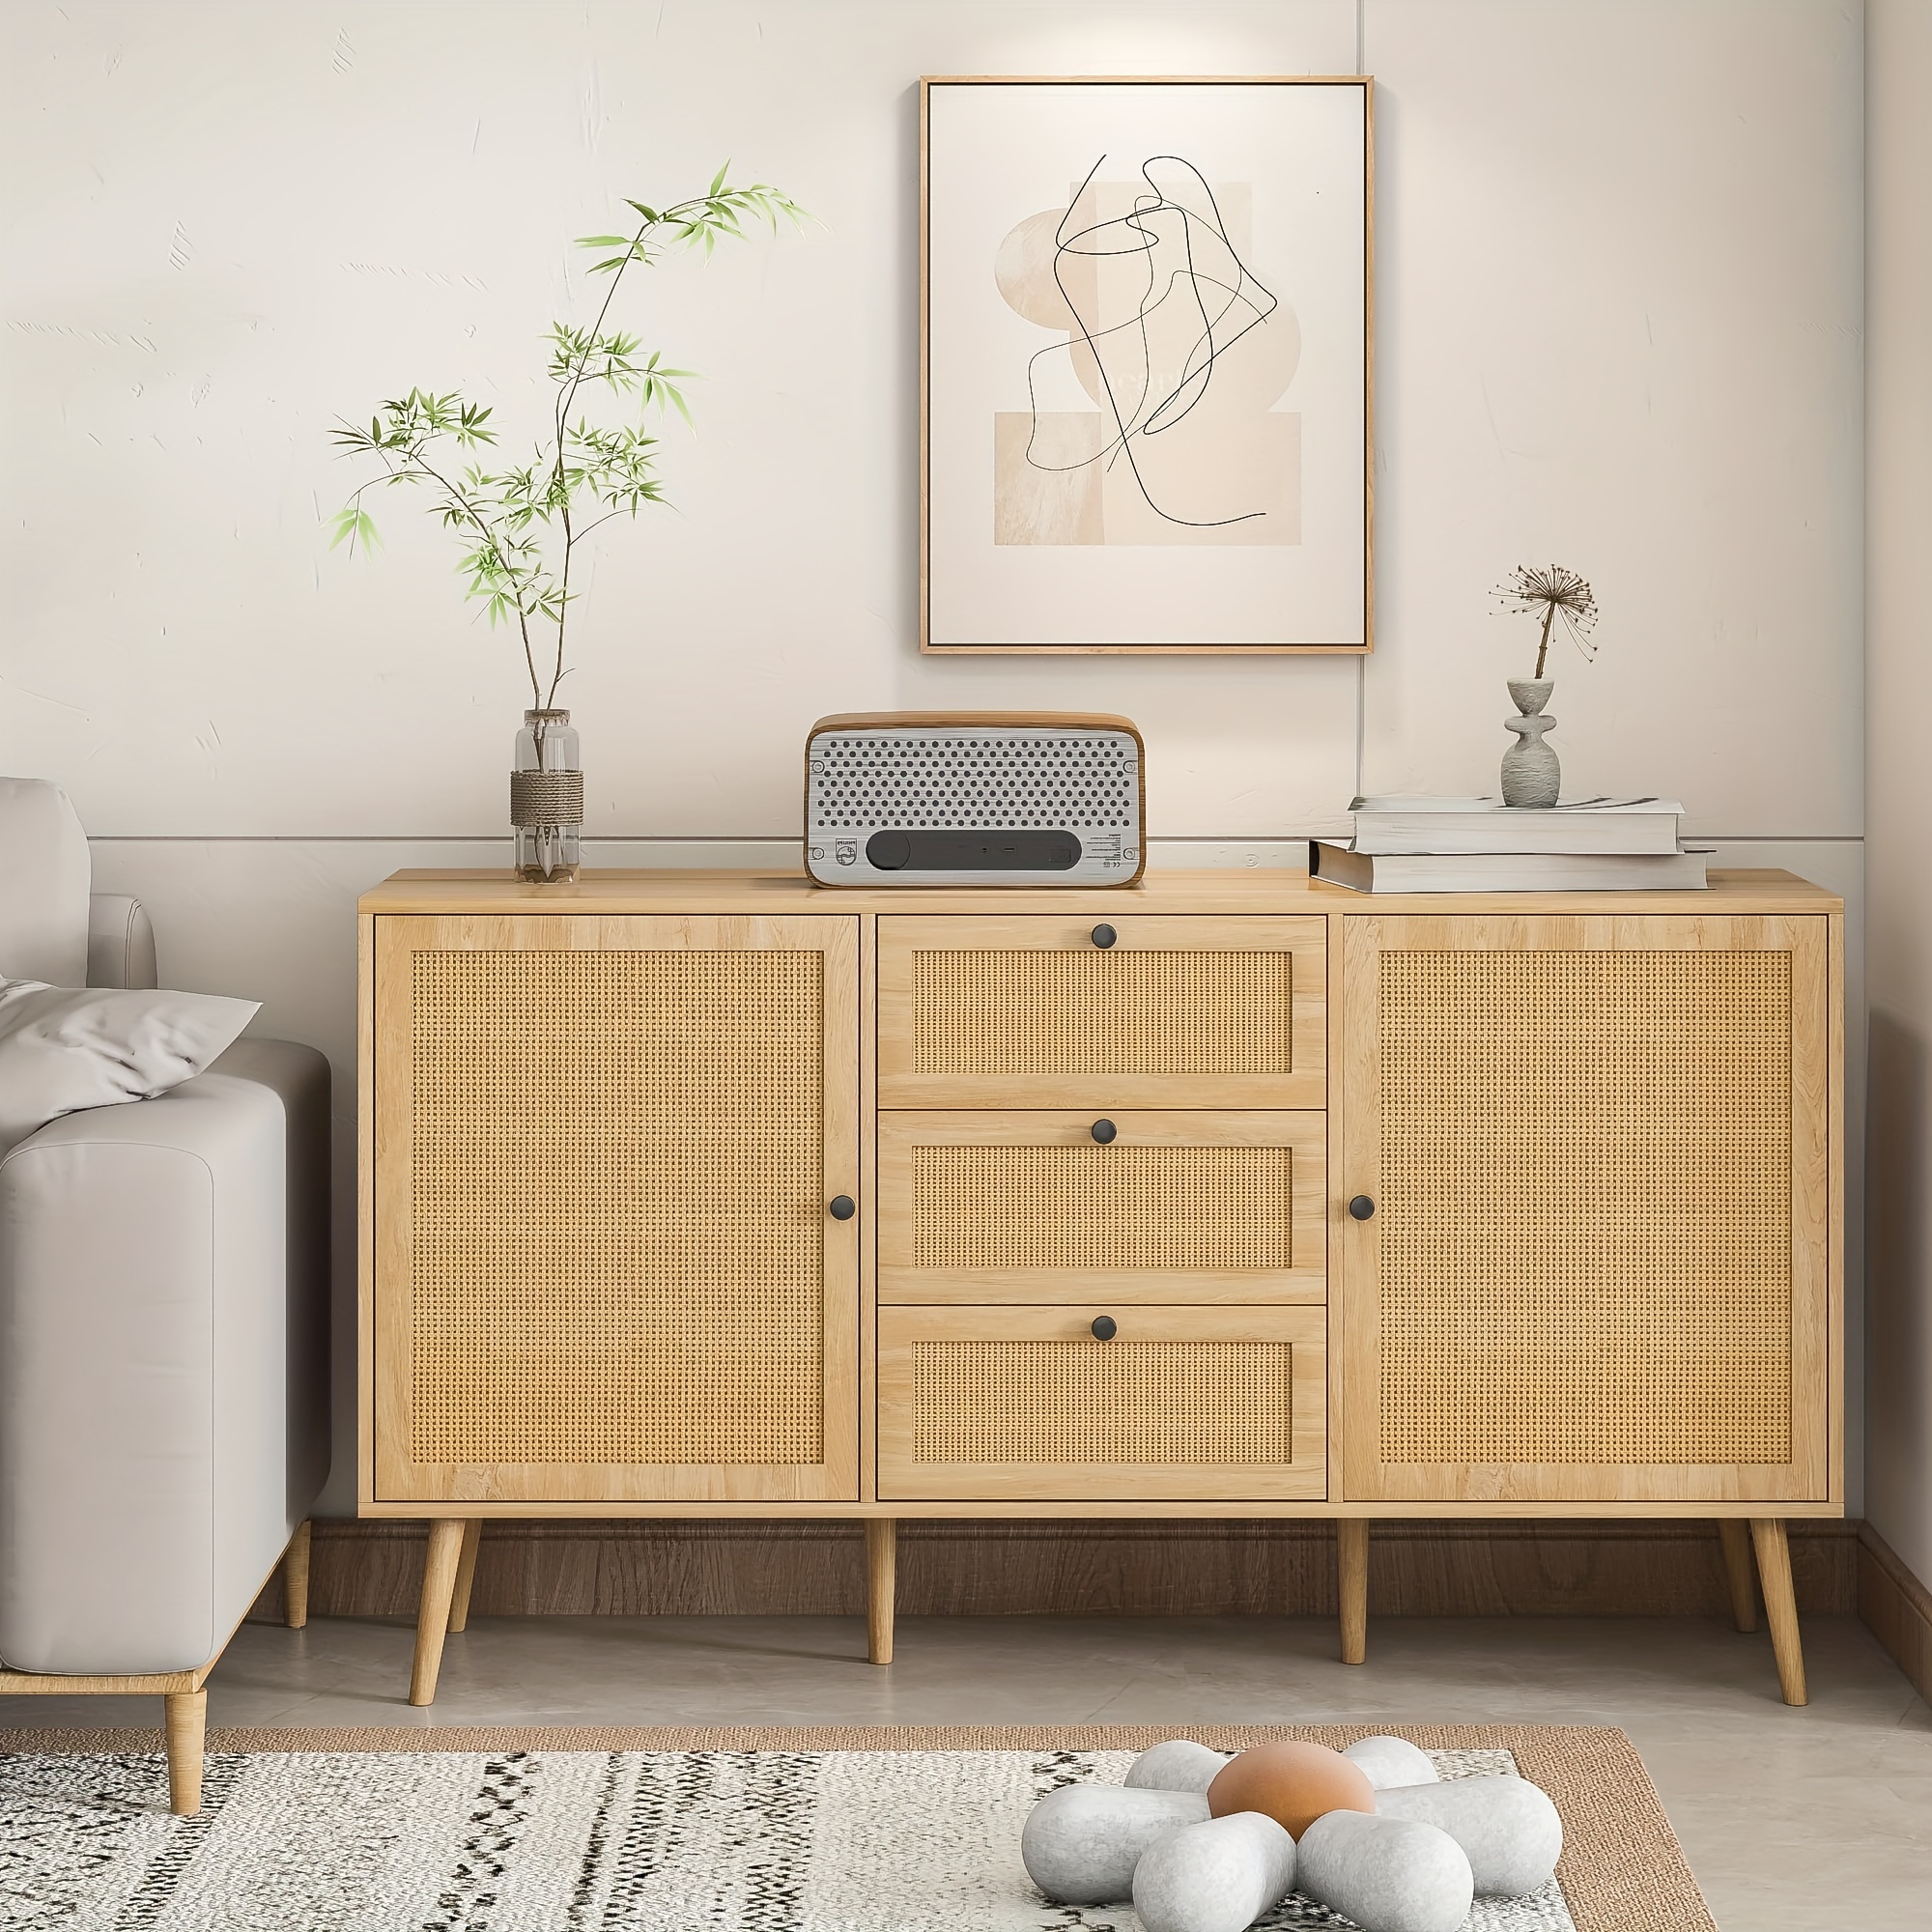 

Rattan Sideboard Buffet Cabinet With Storage, Cabinet With 2 Doors And Adjustable Shelves, Rattan Accent Cabinet With 3 Drawers For Living Room, Kitchen, Dining Room, Entryway